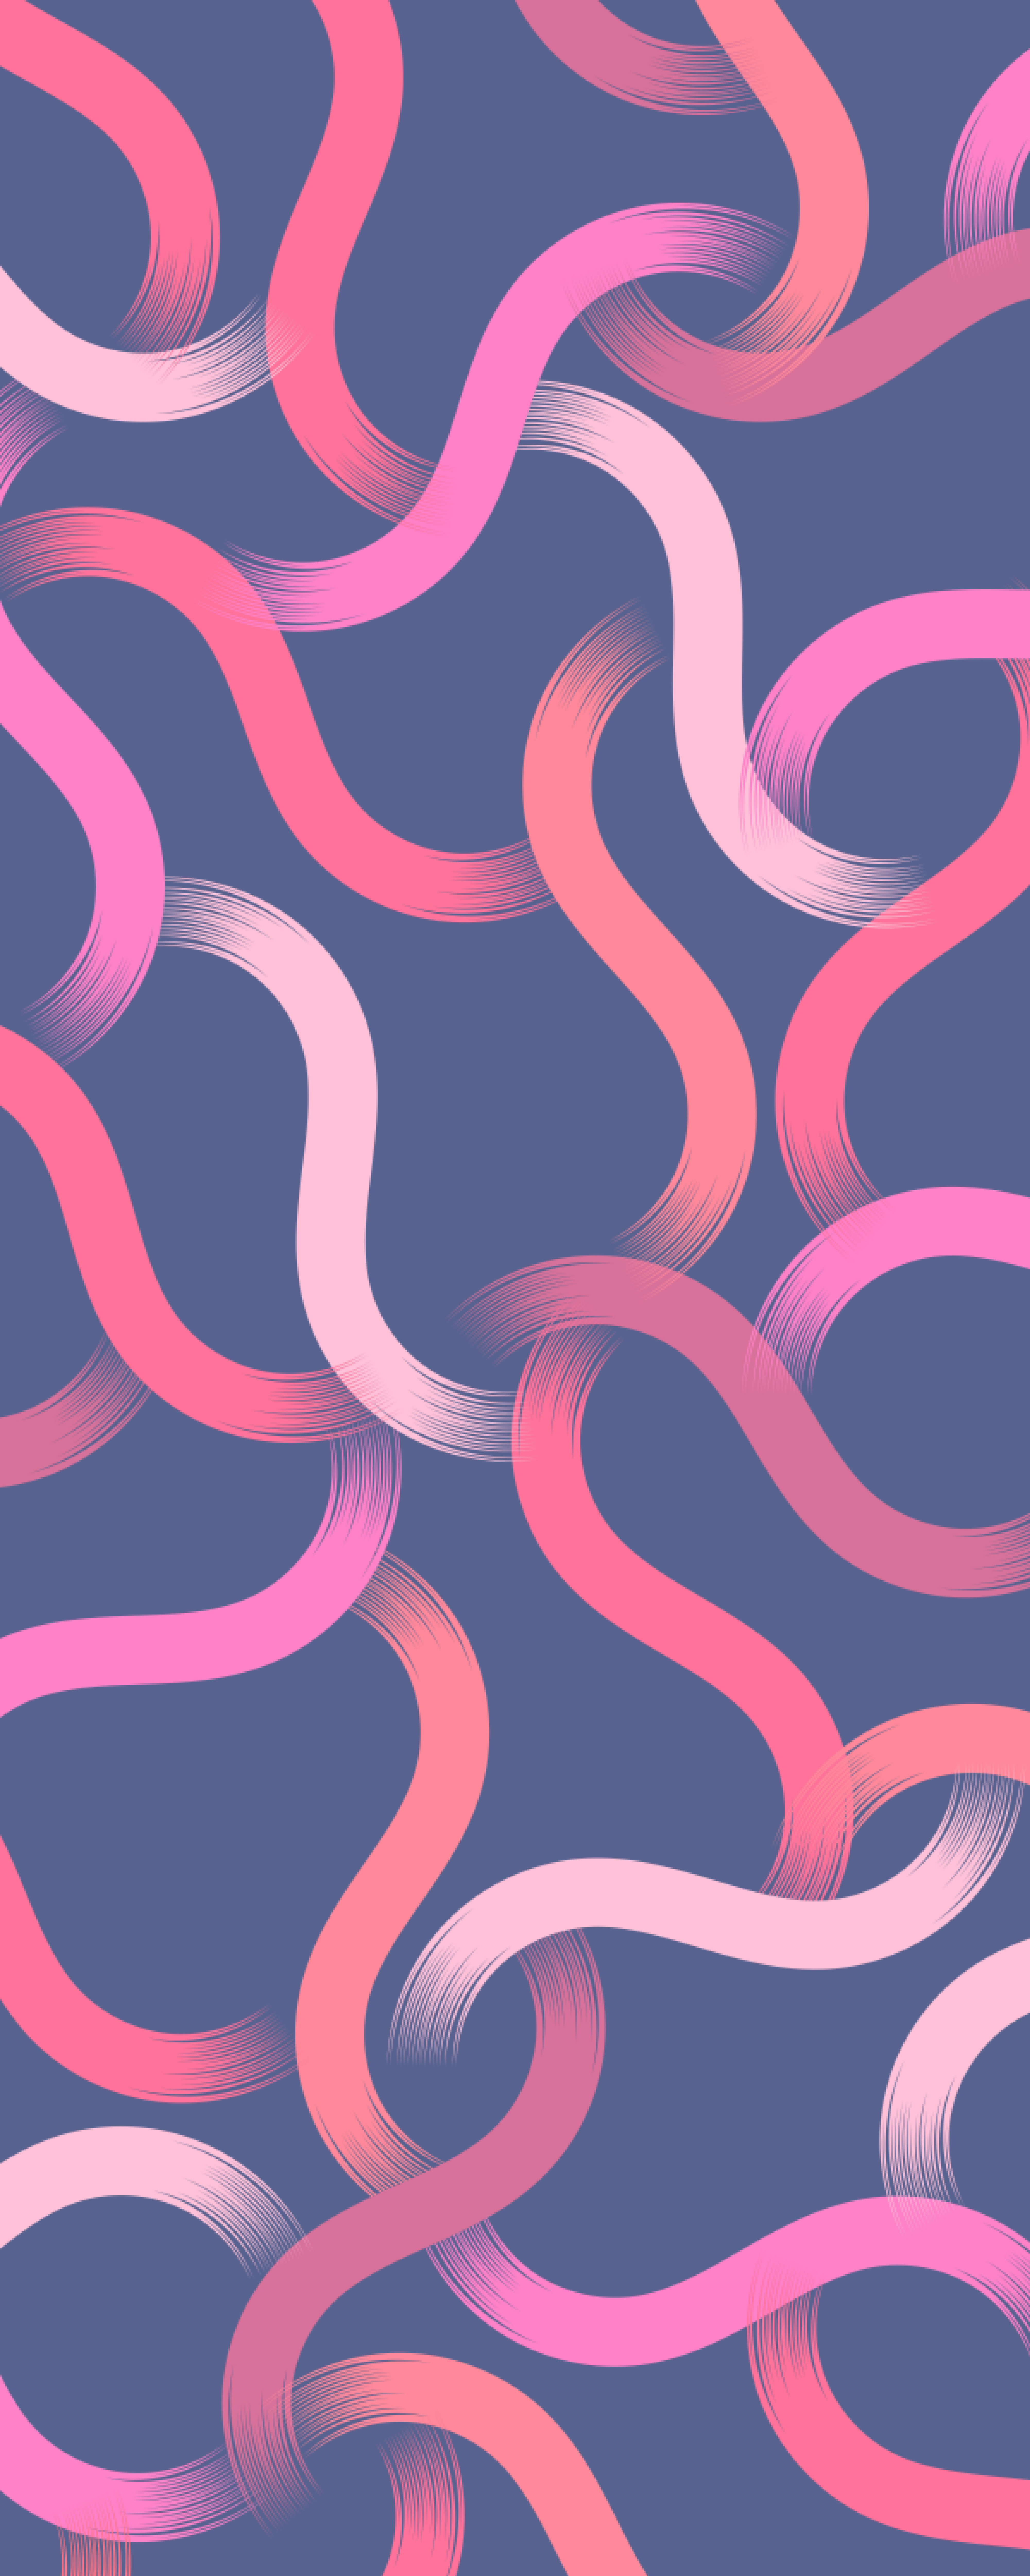 textures, texture, pink, lines, winding, sinuous, shades, smears, strokes, intertwining, interweaving